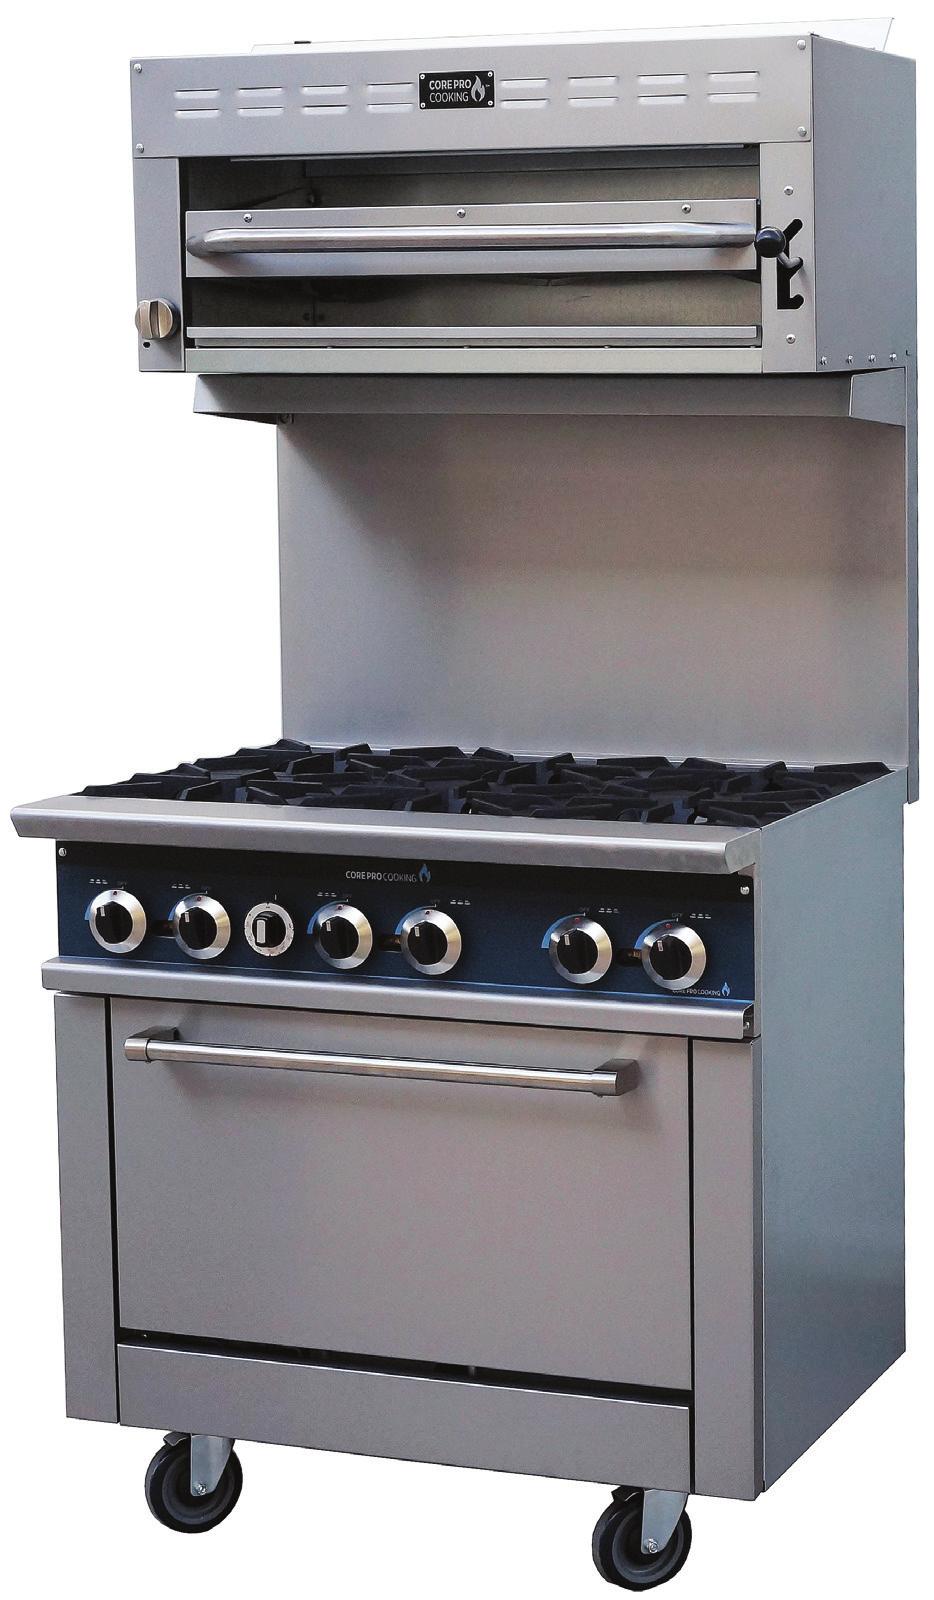 SALAMANDER BROILER CP-SM-36 CORE PRO PRODUCT FEATURES: Stainless Steel front and Sides 35,000 BTU Infra-red burner Manual gas control from 300 F to 1000 F Full width